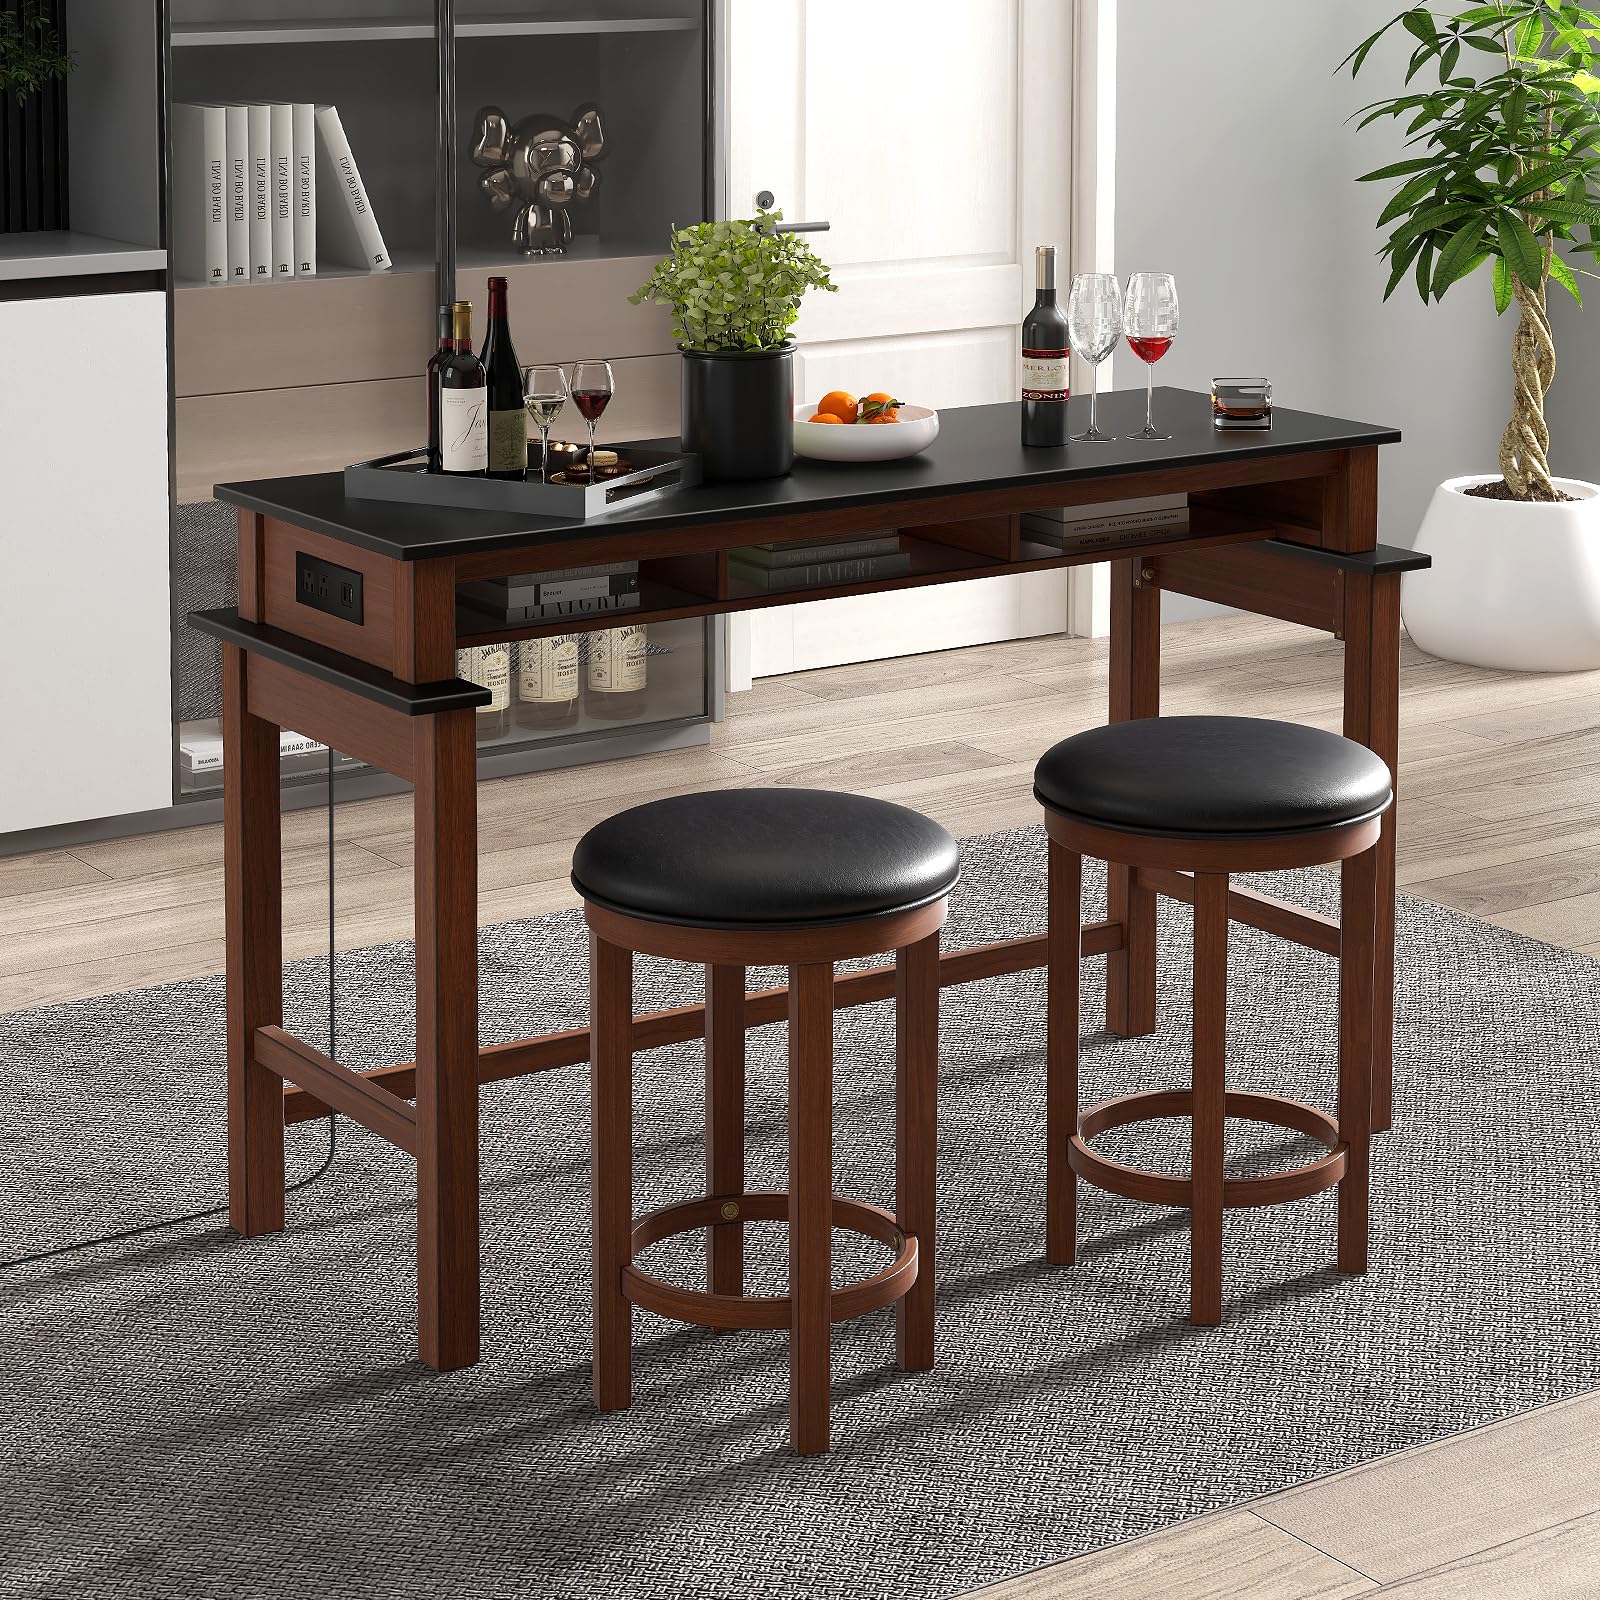 Giantex Small Dining Table Set for 2 - Bar Table and 2 Bar Stools